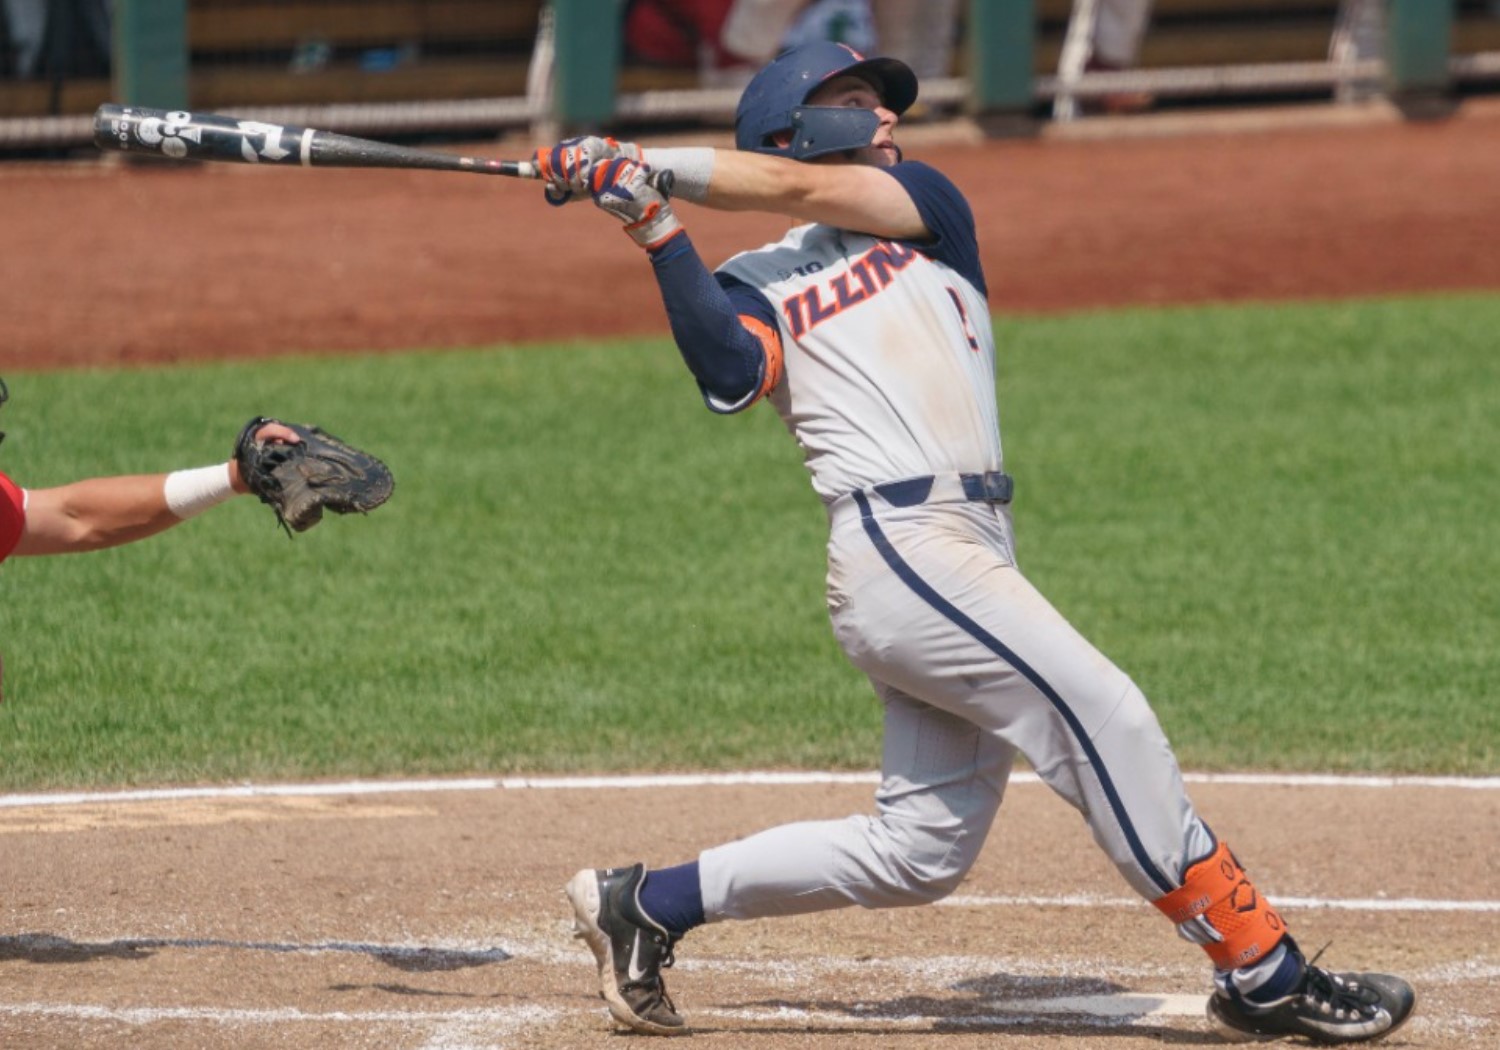 Illinois Baseball Again Finishes Big Ten Tournament With Early Exit; Illini Seasons Ends 25-27